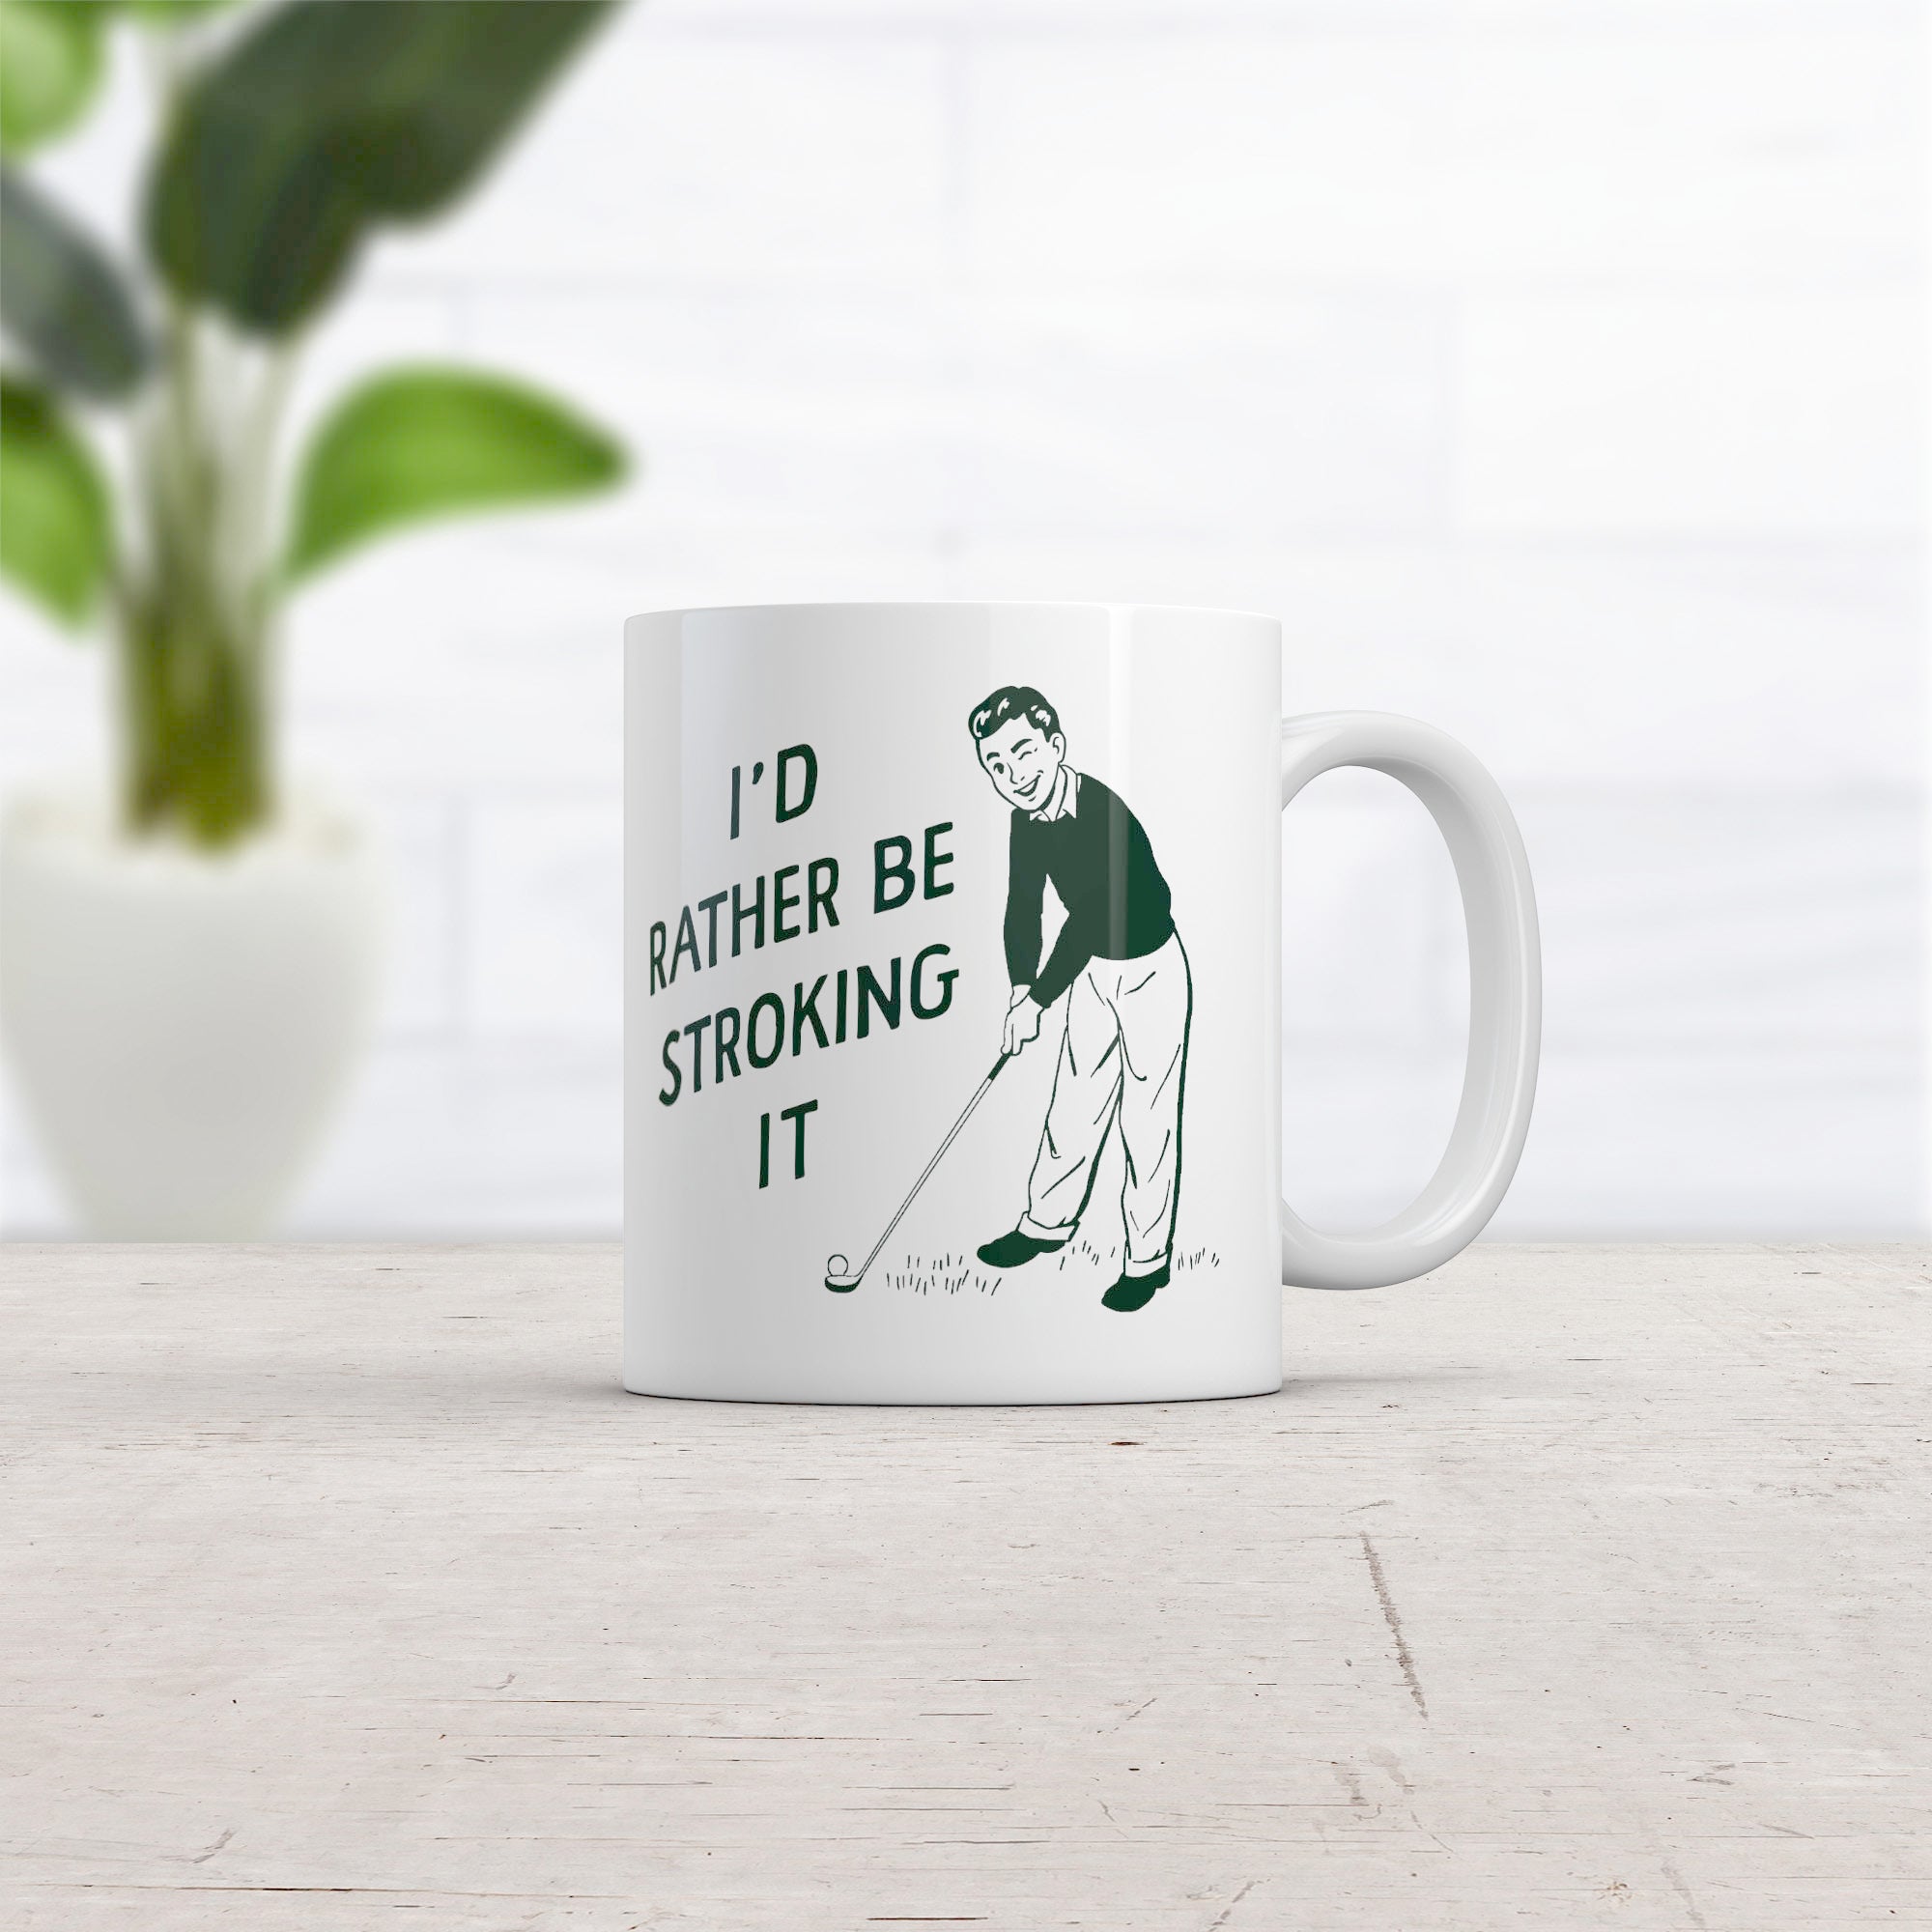 Funny White Id Rather Be Stroking It Coffee Mug Nerdy Golf Sex Tee